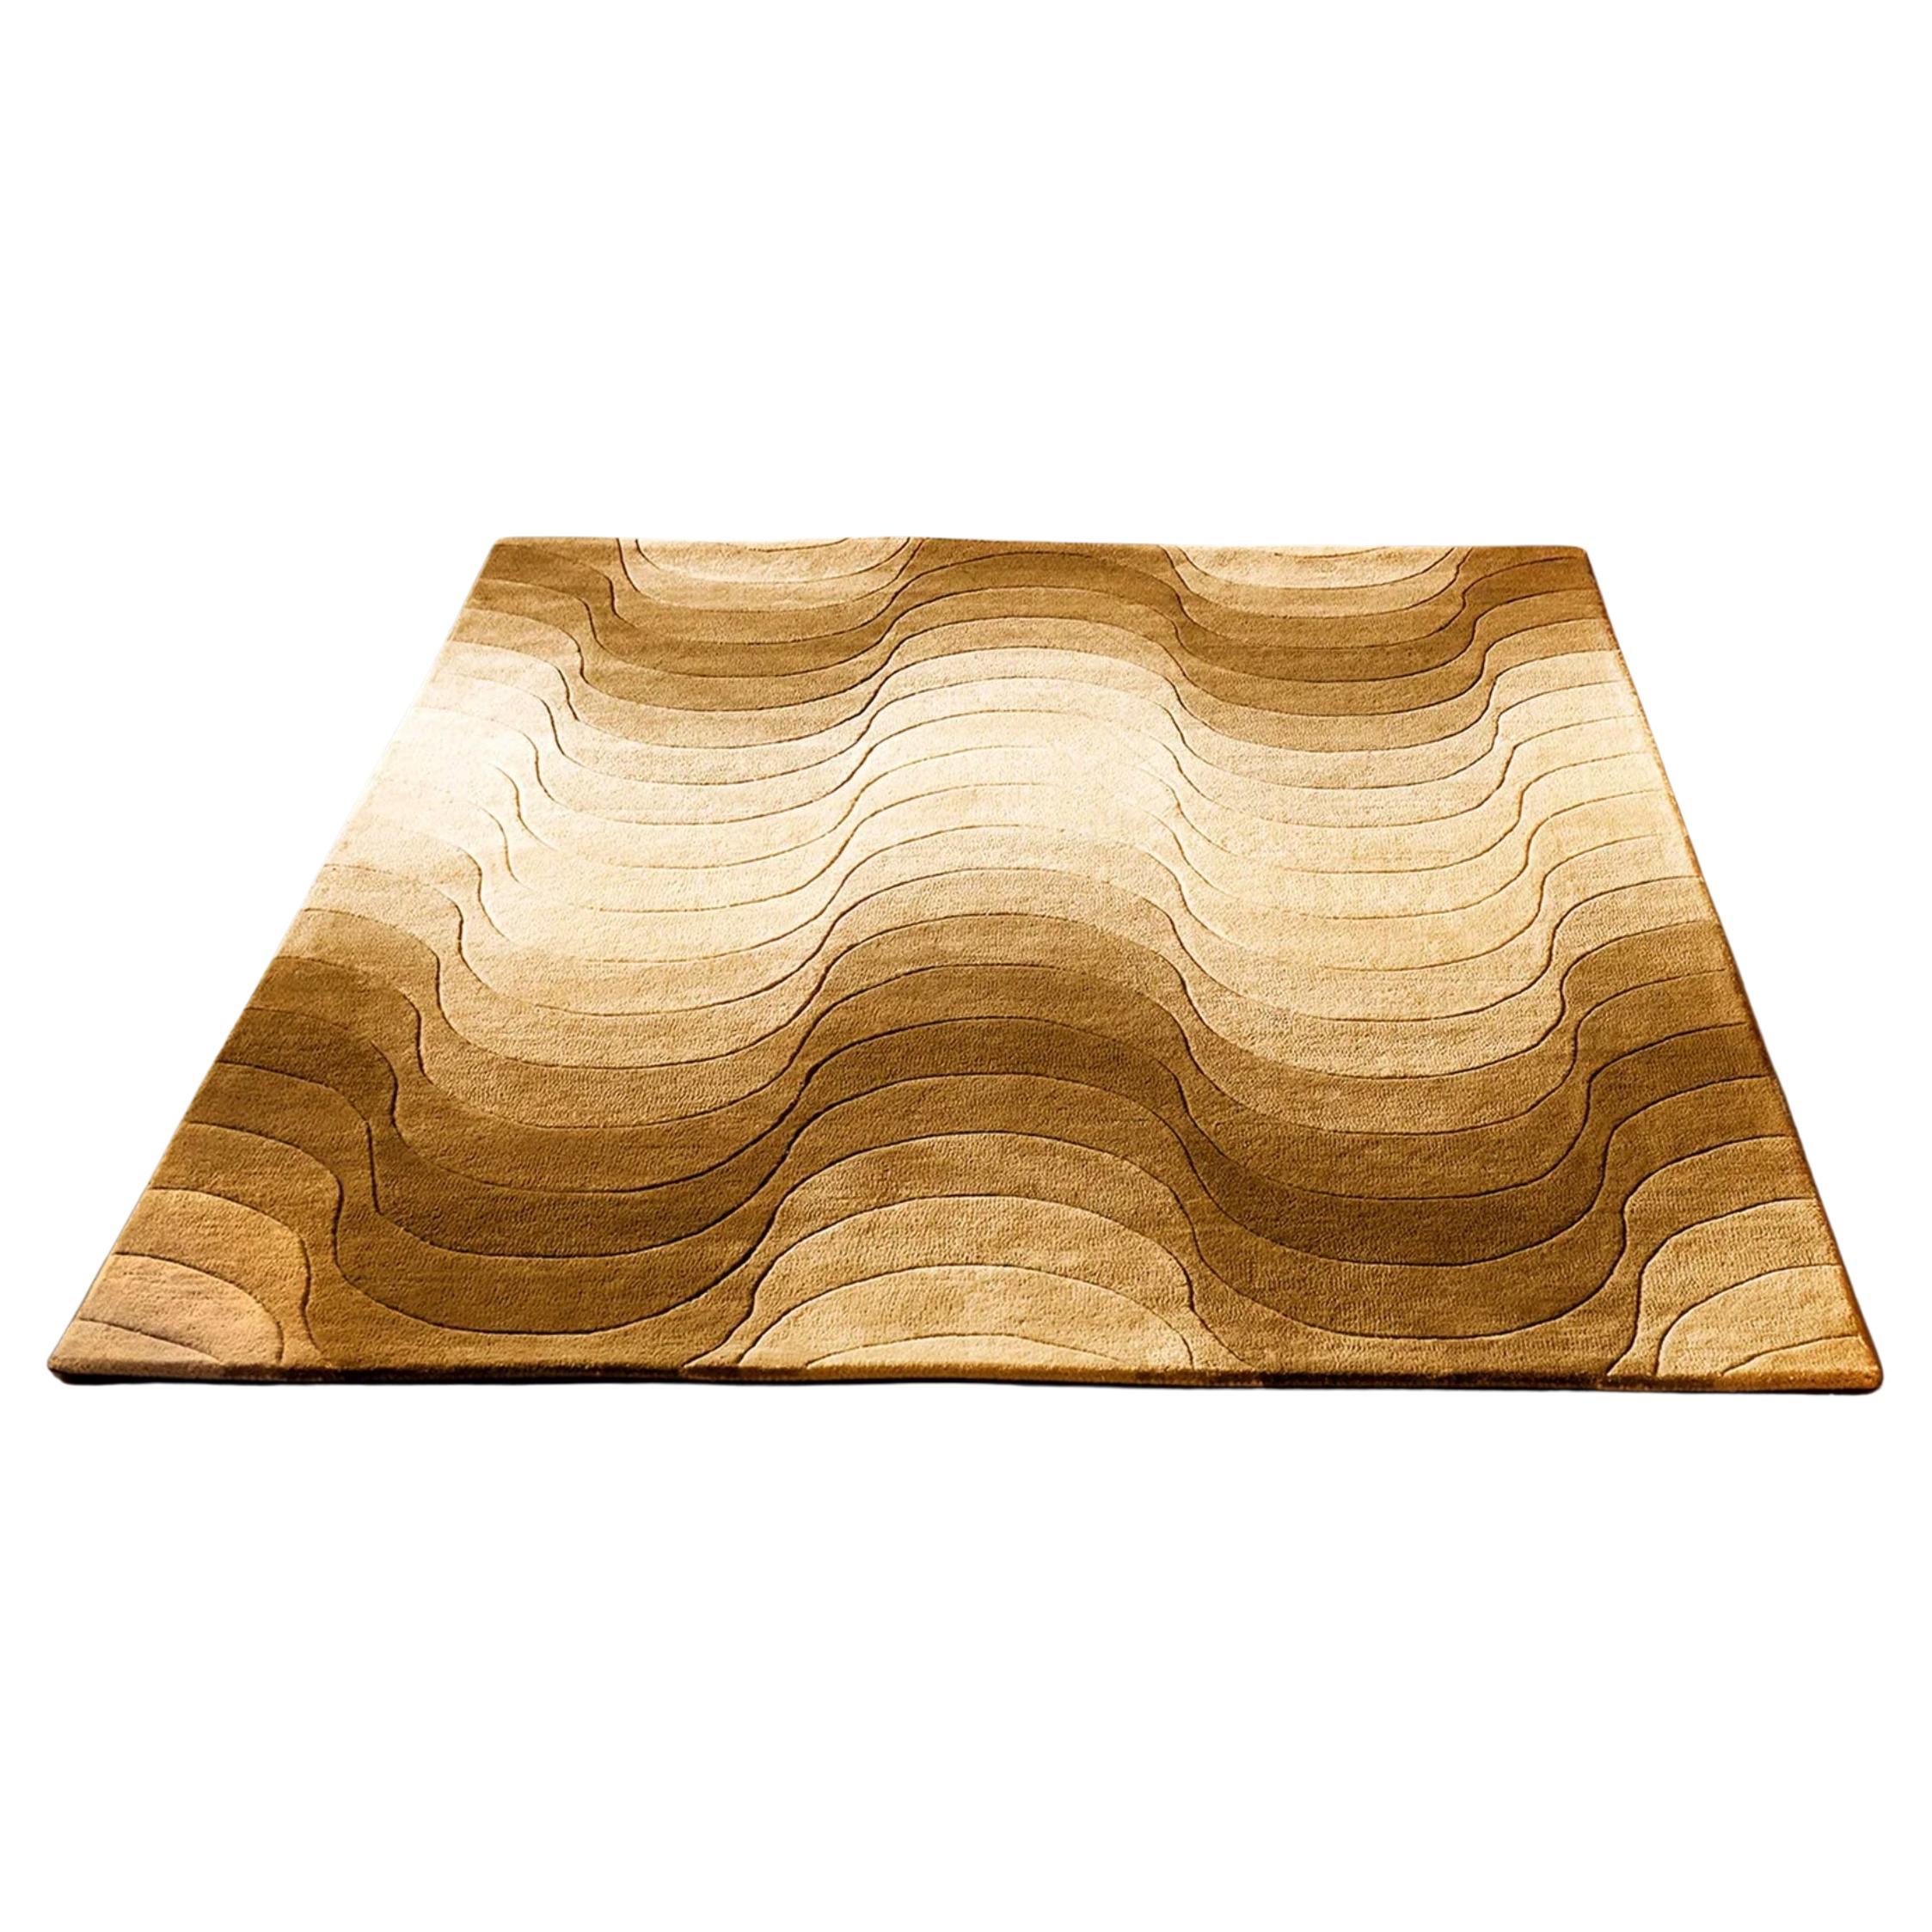 Verner Panton 'Wave' Rug 240 x 170cm in Yellow for Verpan For Sale